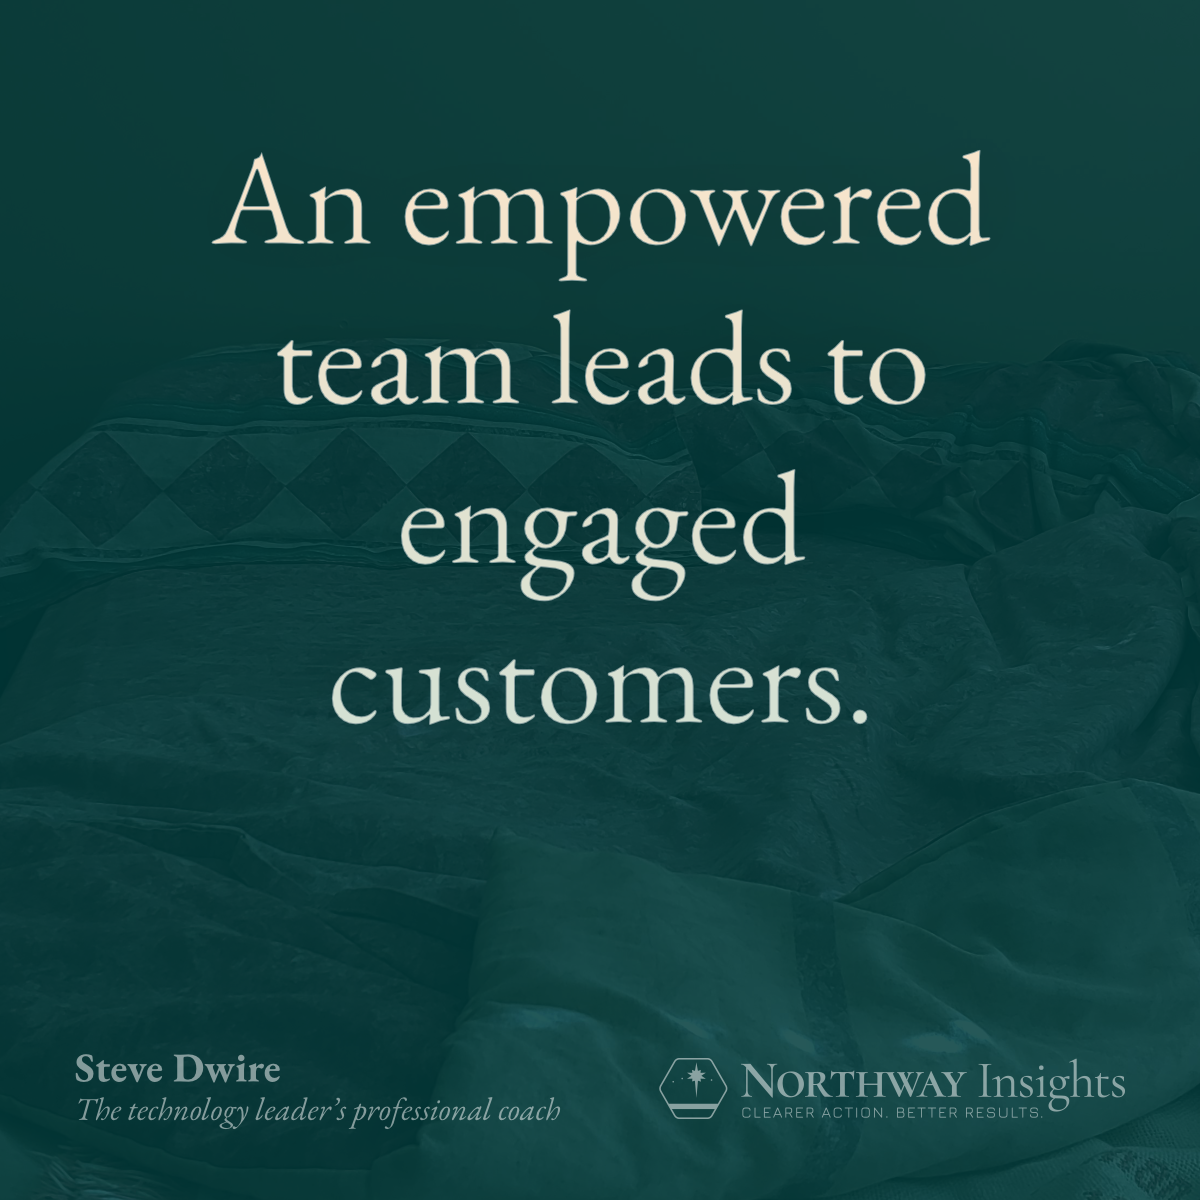 An empowered team leads to engaged customers.